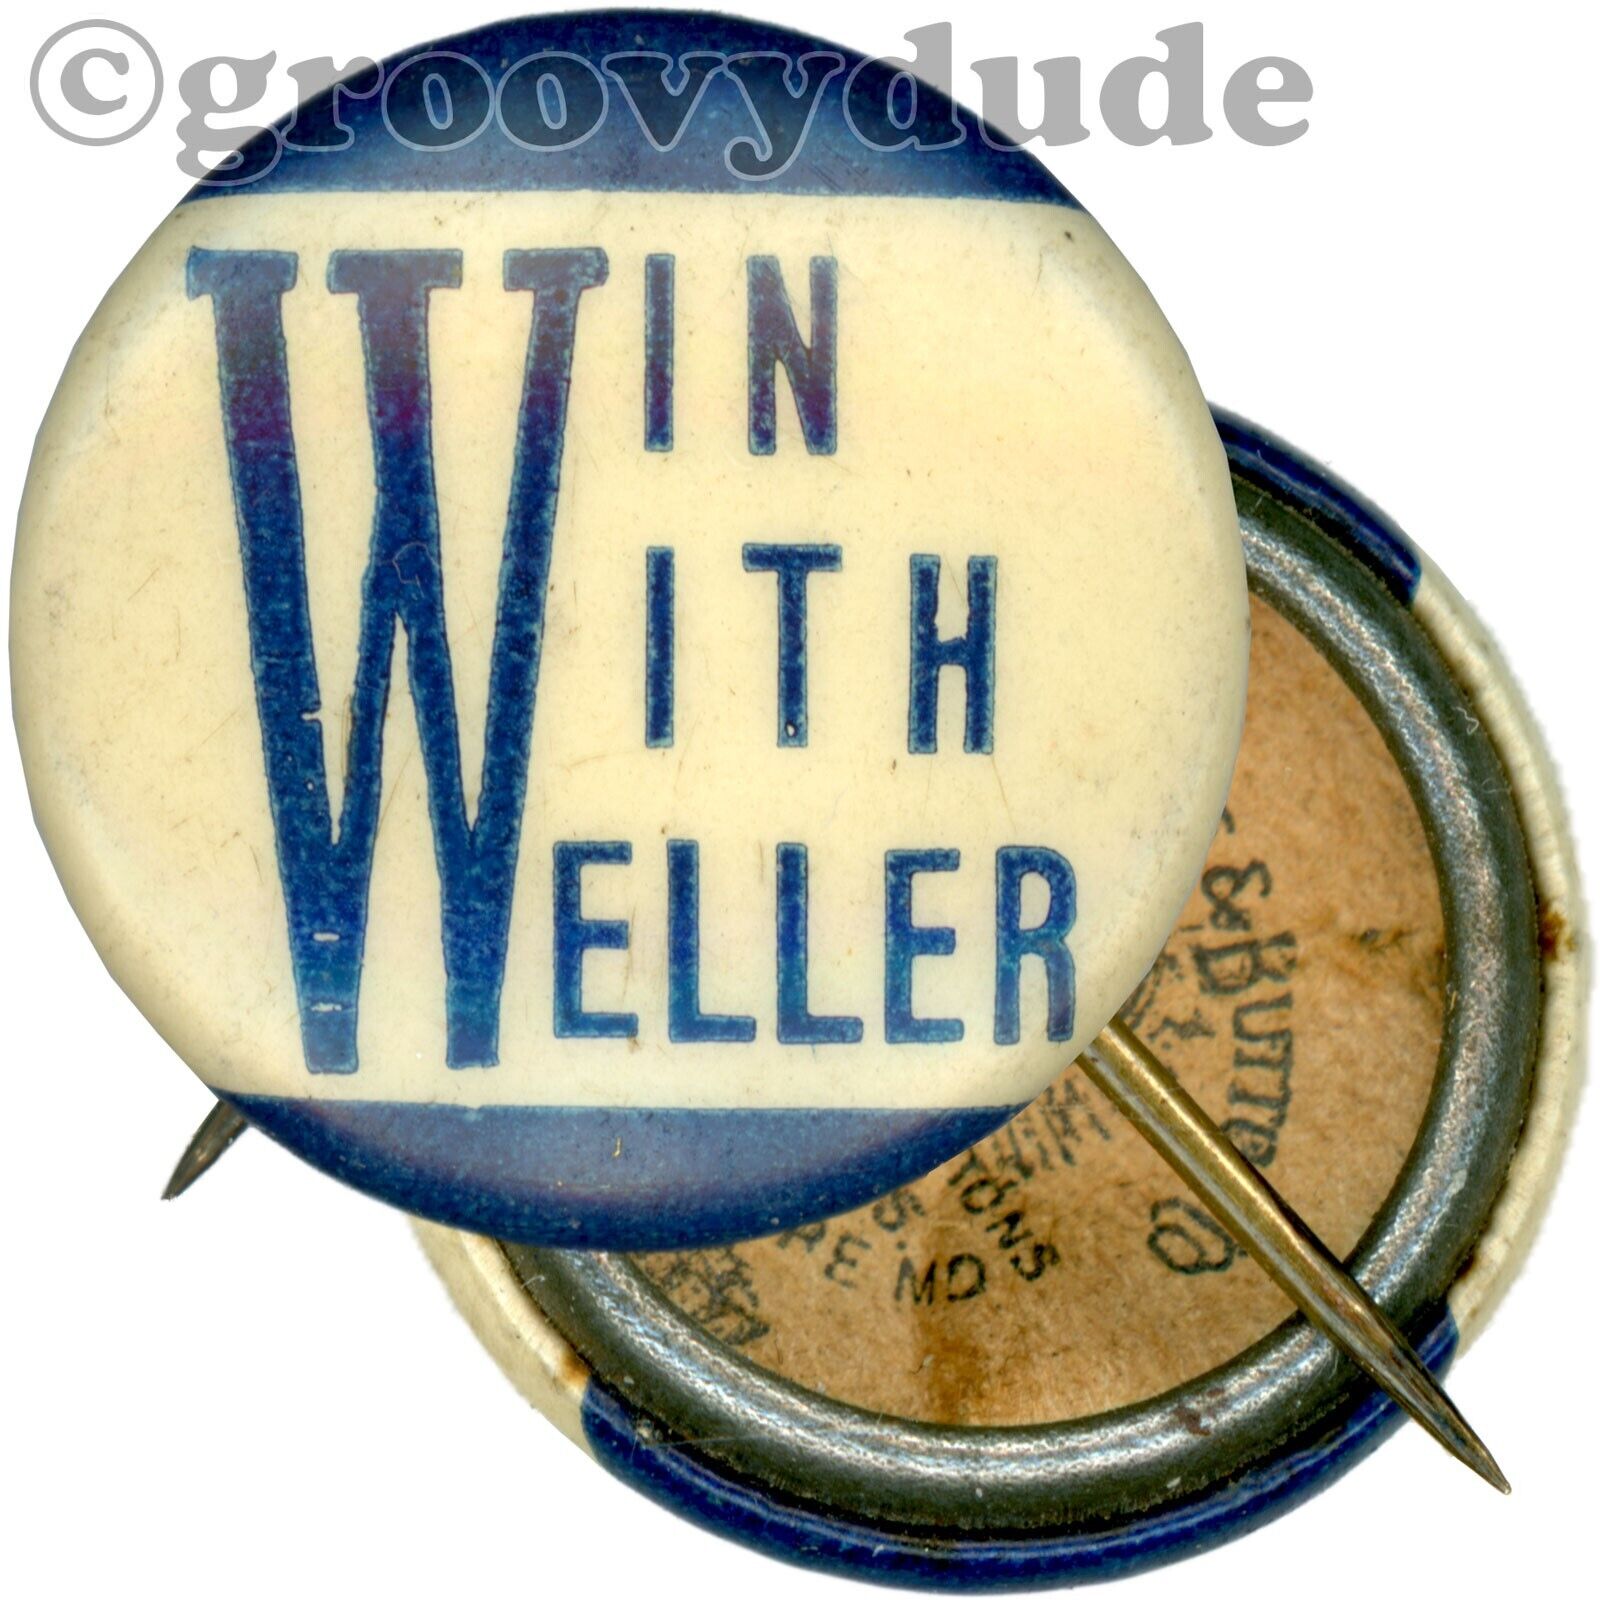 1915 Win With Weller Governor Maryland MD Political Campaign Pin Pinback Button